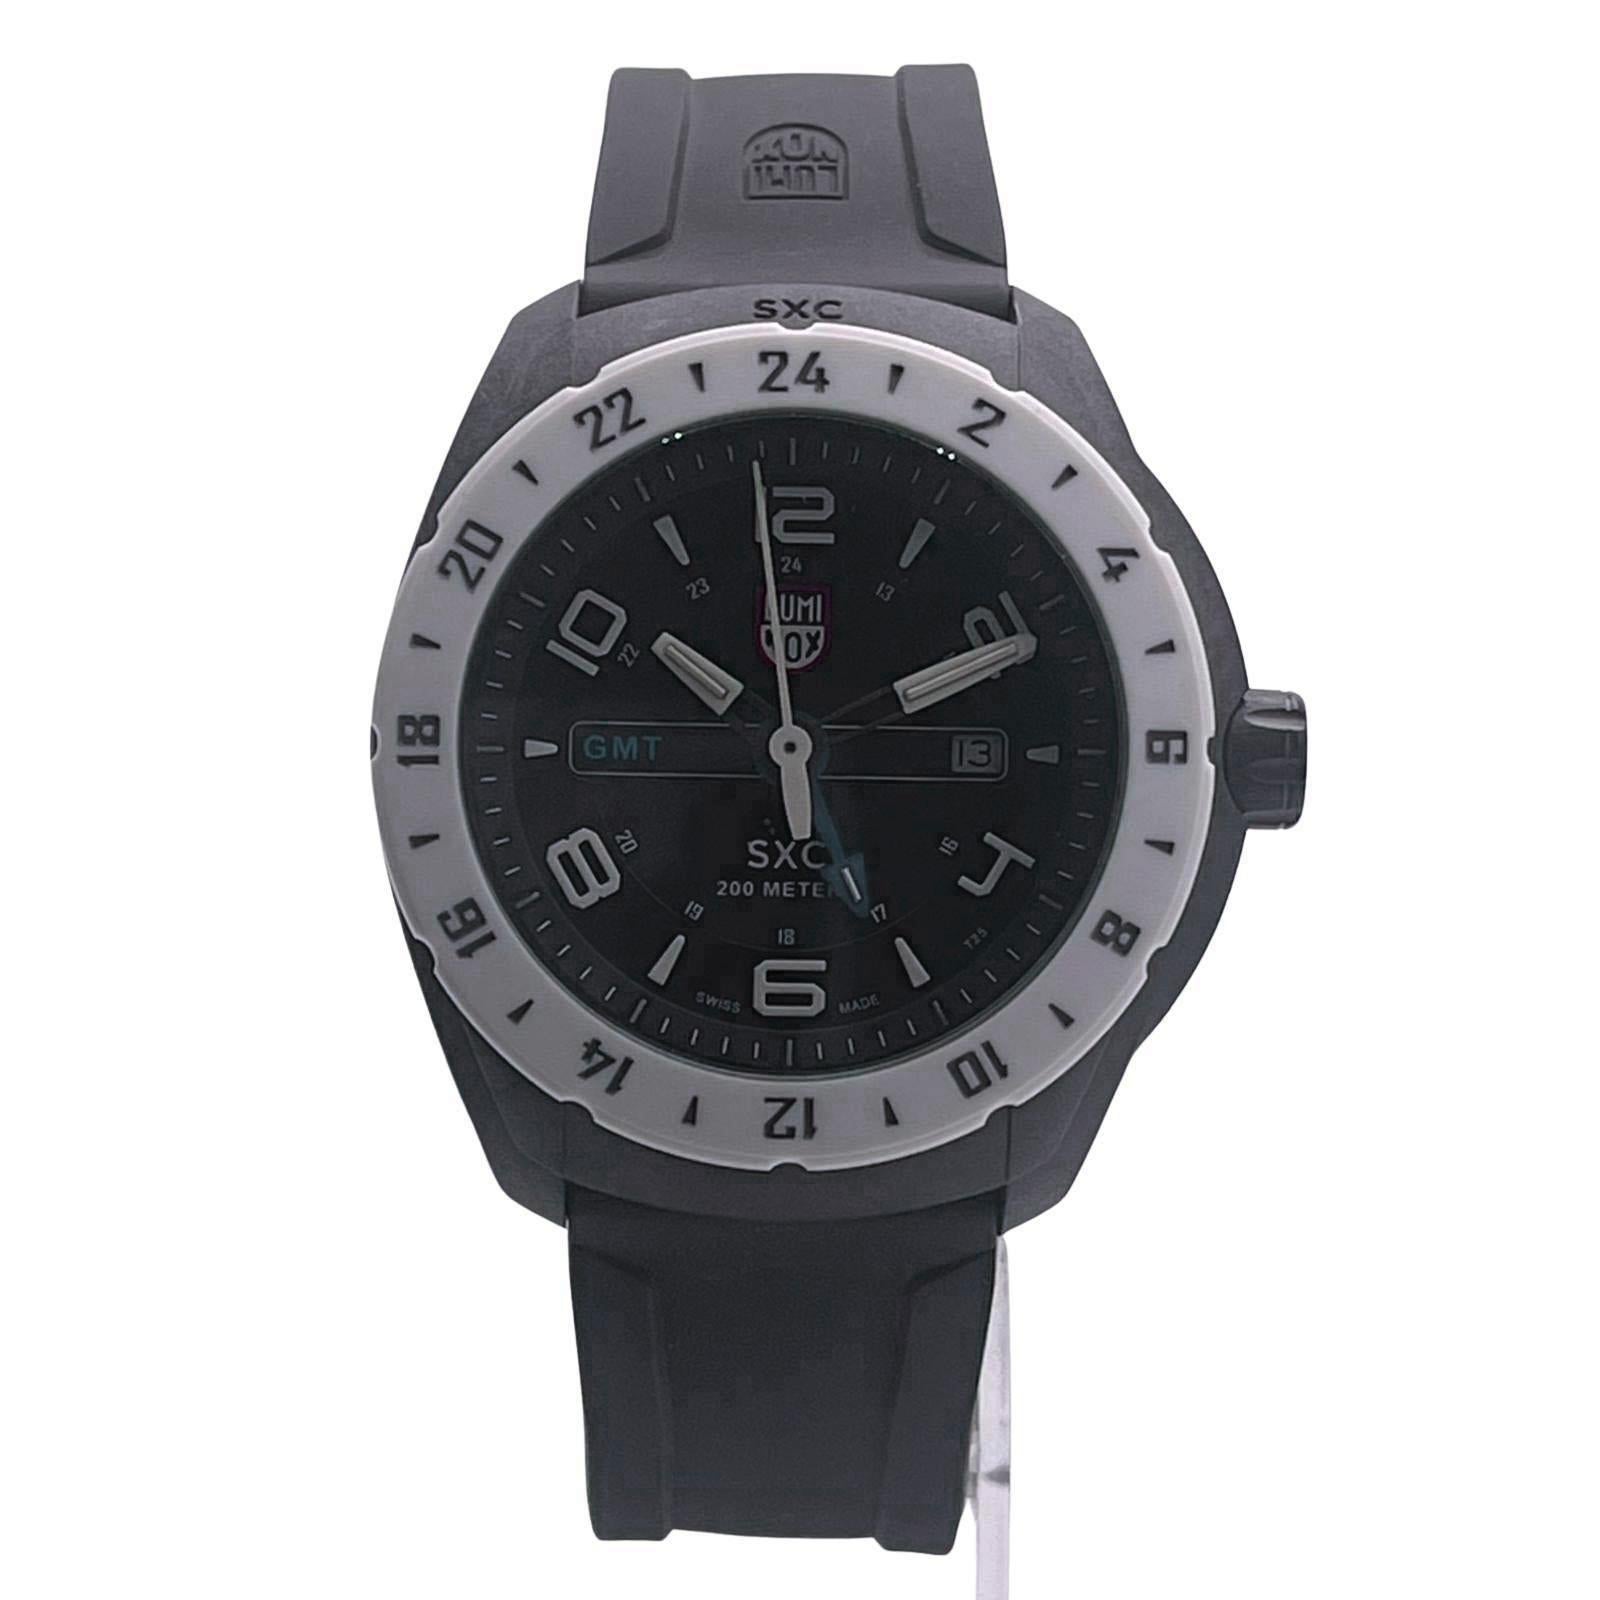 Display Model Luminox SXC Space PC GMT Men's Watch XU.5027. The Watch has a Tiny marks on the Bezel due to Storing. This Timepiece is powered by Quartz (battery) movement with features: Carbon case with Silicone strap and Stainless Steel Buckle